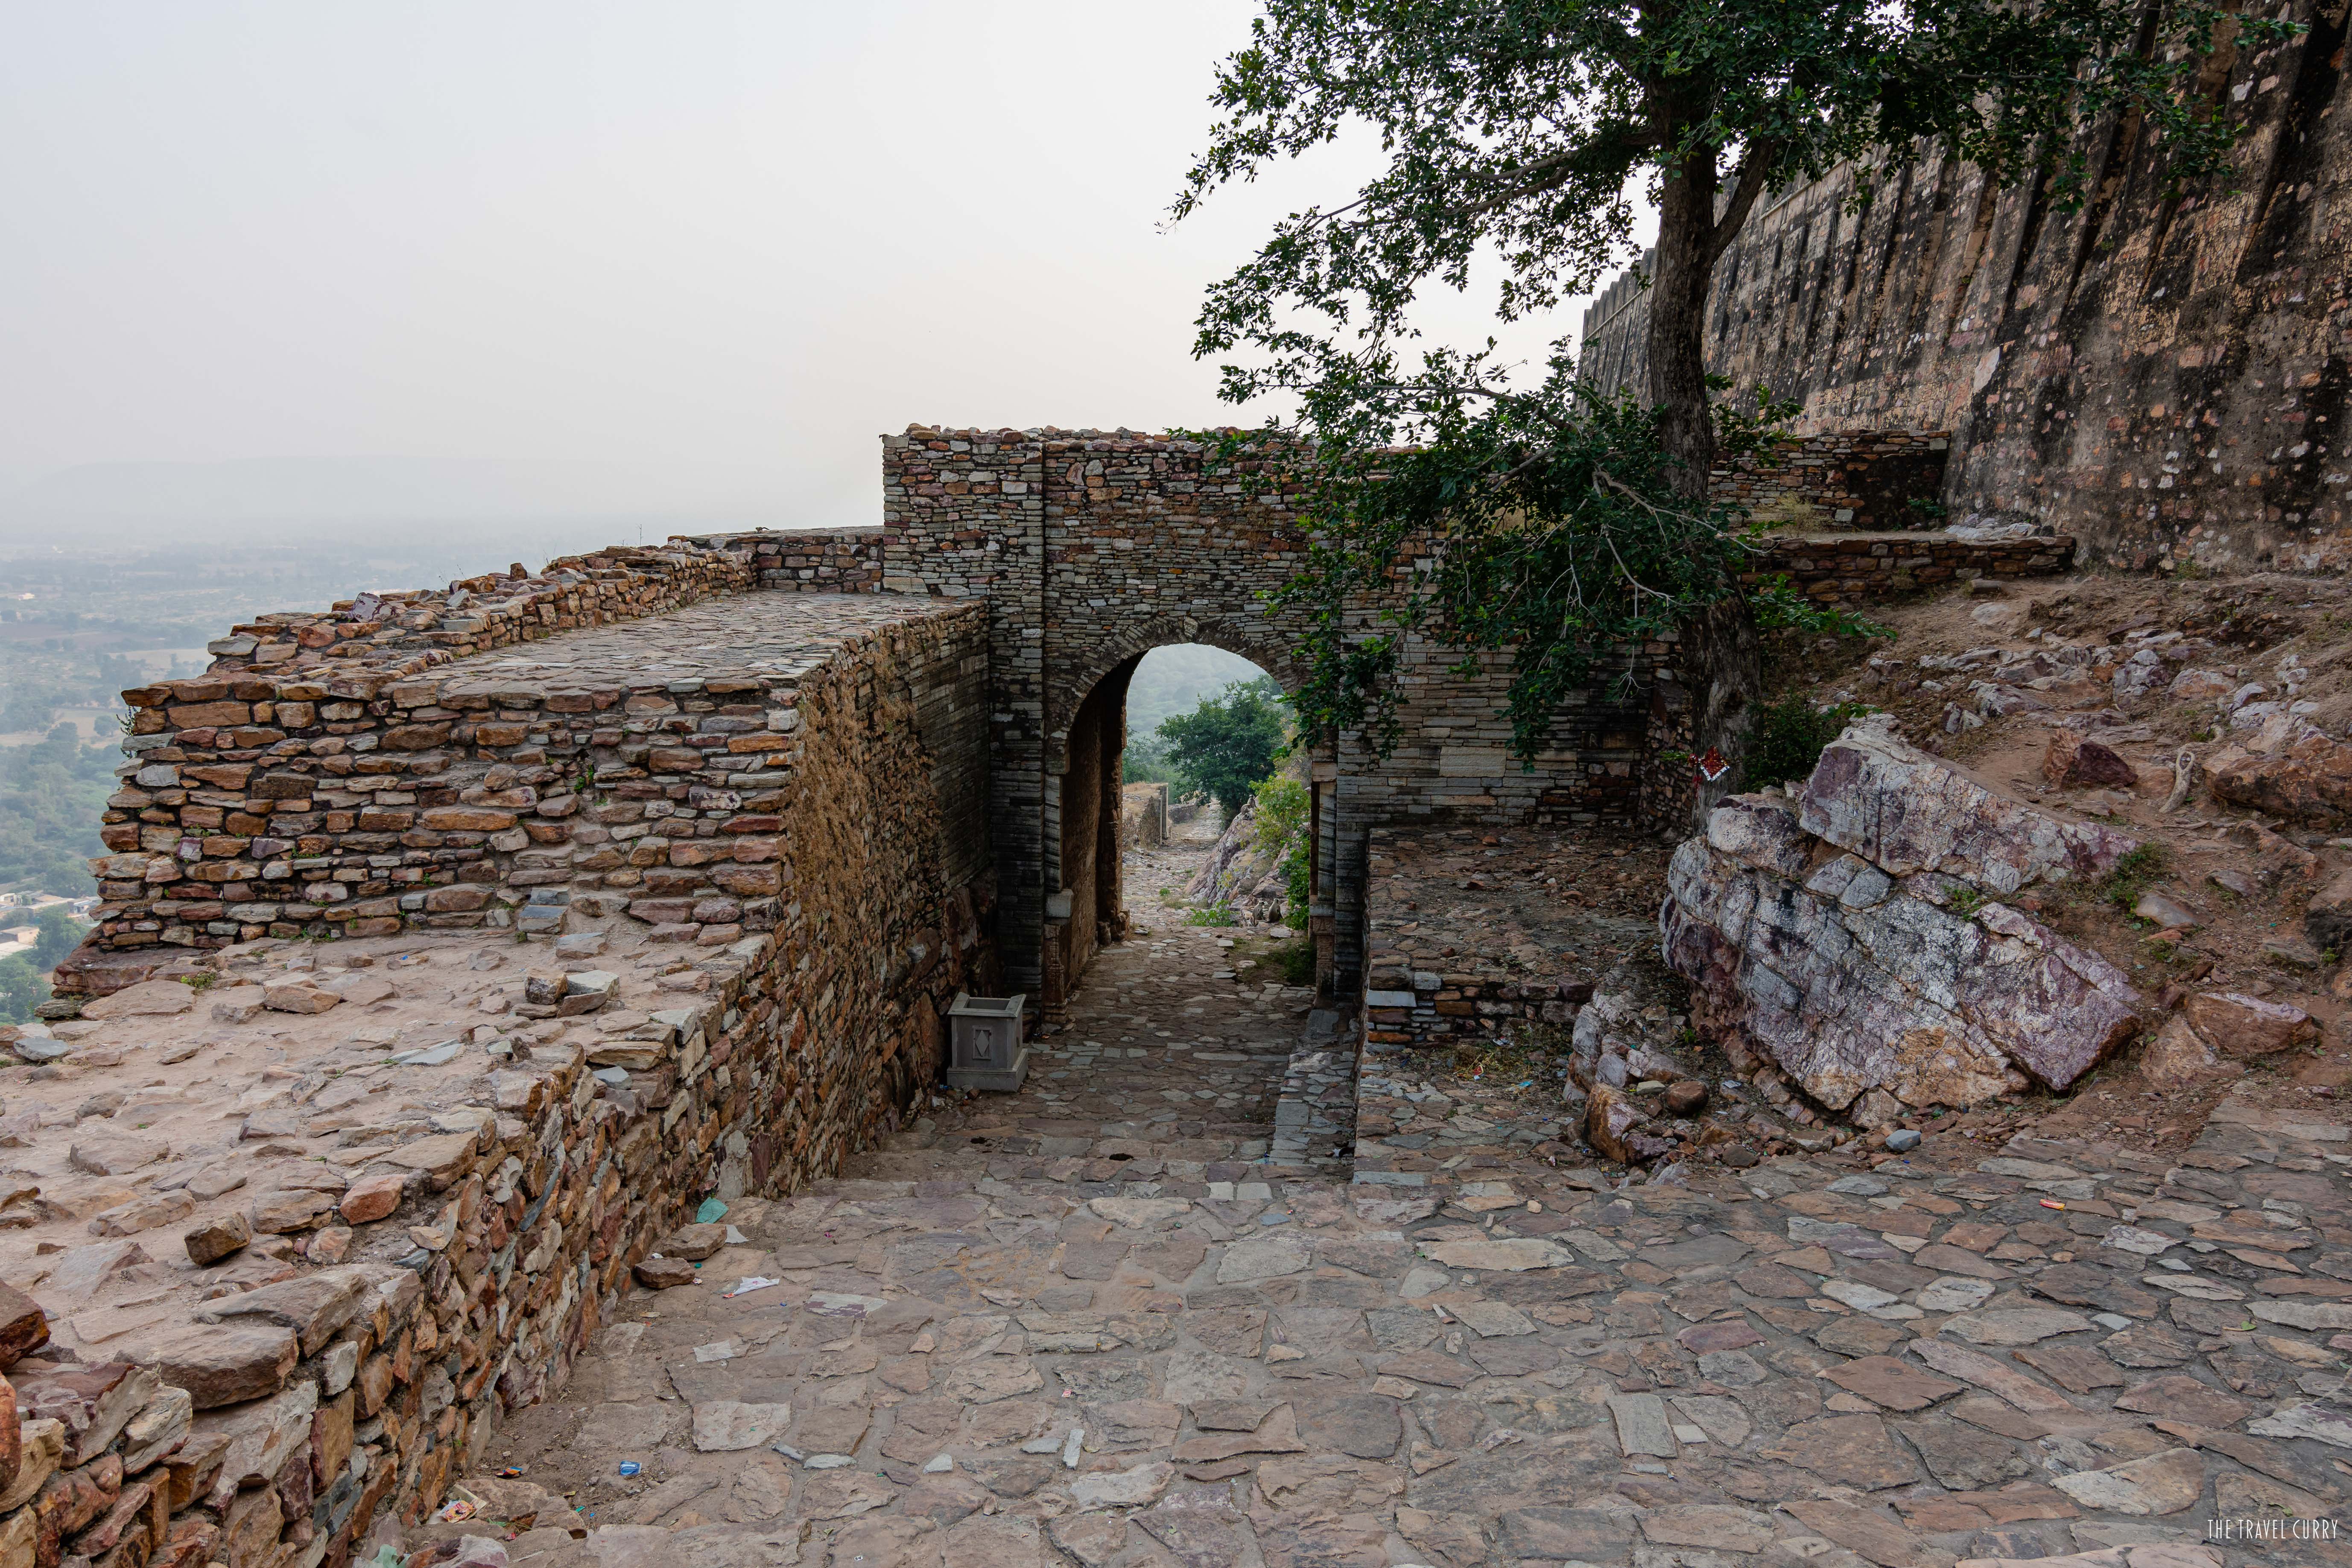 The alley from where Khilji invaded Chittorgarh